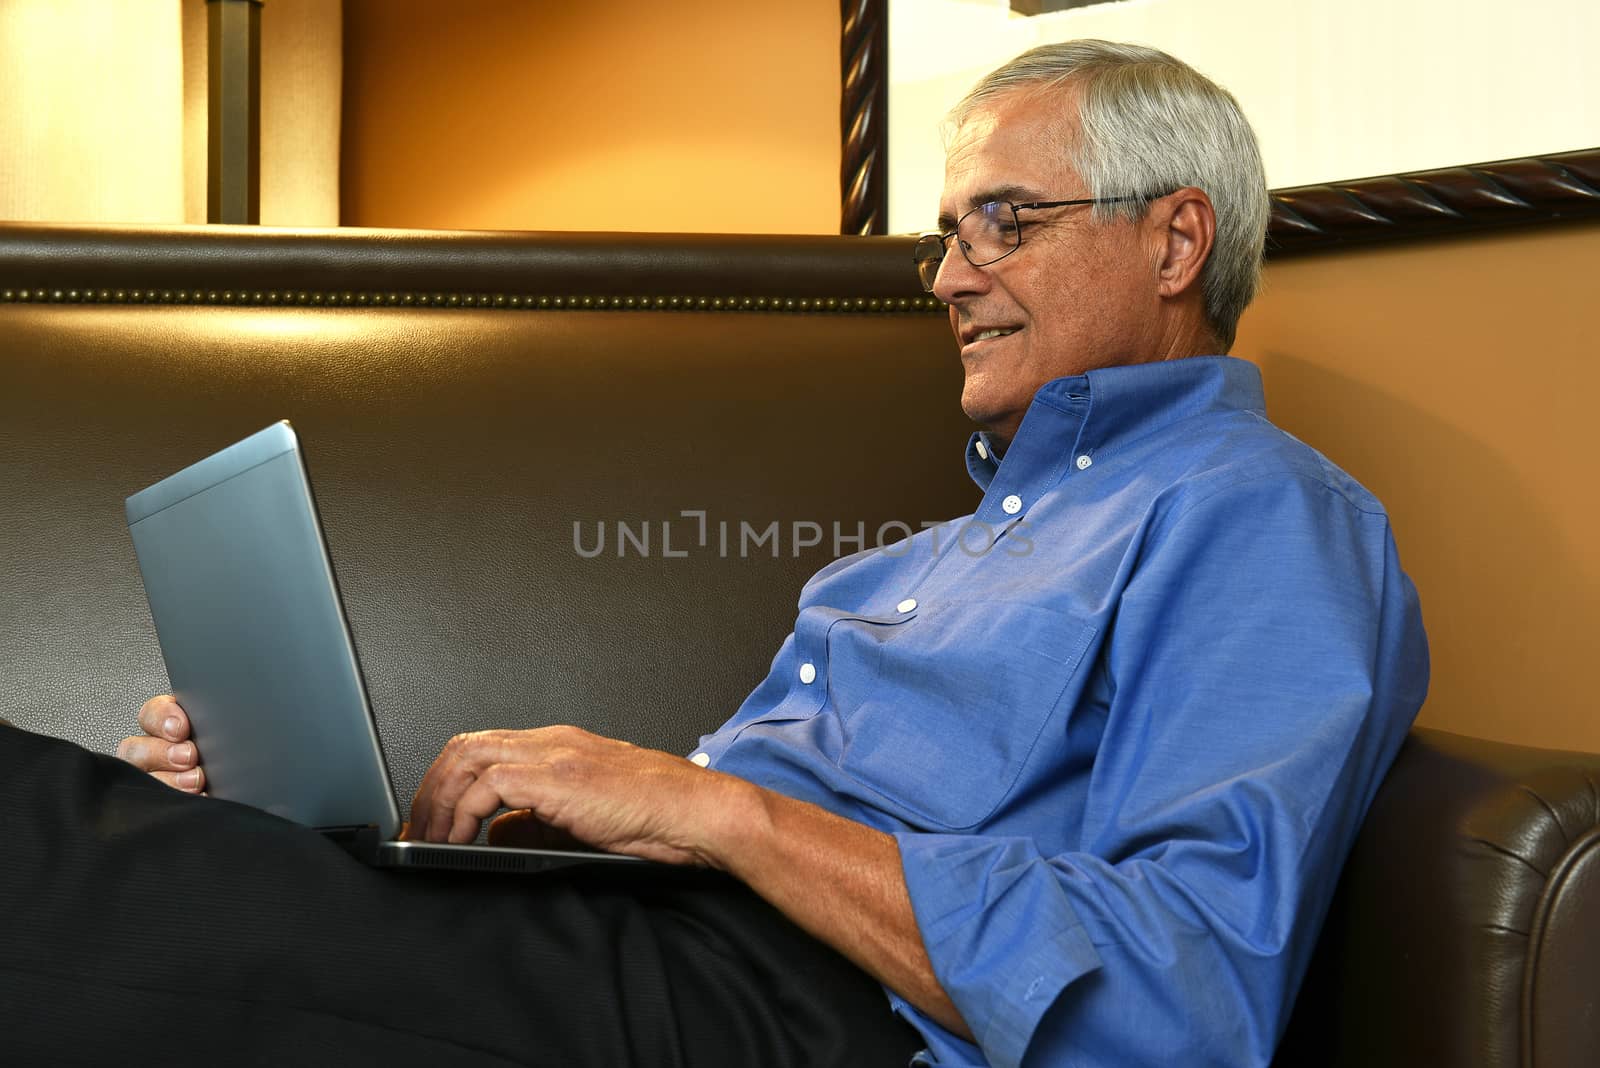 Closeup of a senior businessman sitting on a sofa in his hotel room while using a tablet computer. The man is seen from the side.